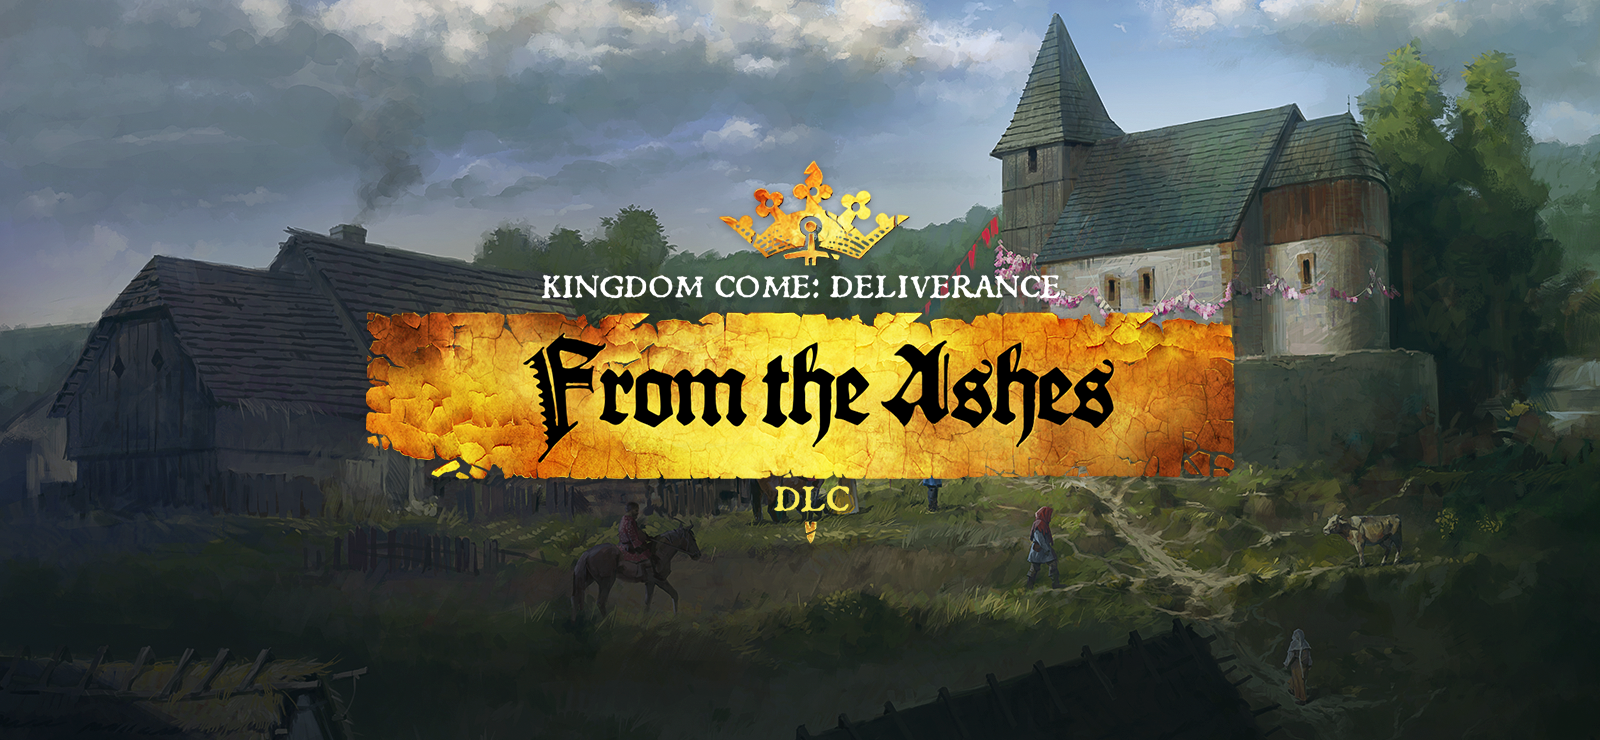 Kingdom Come: Deliverance – From The Ashes